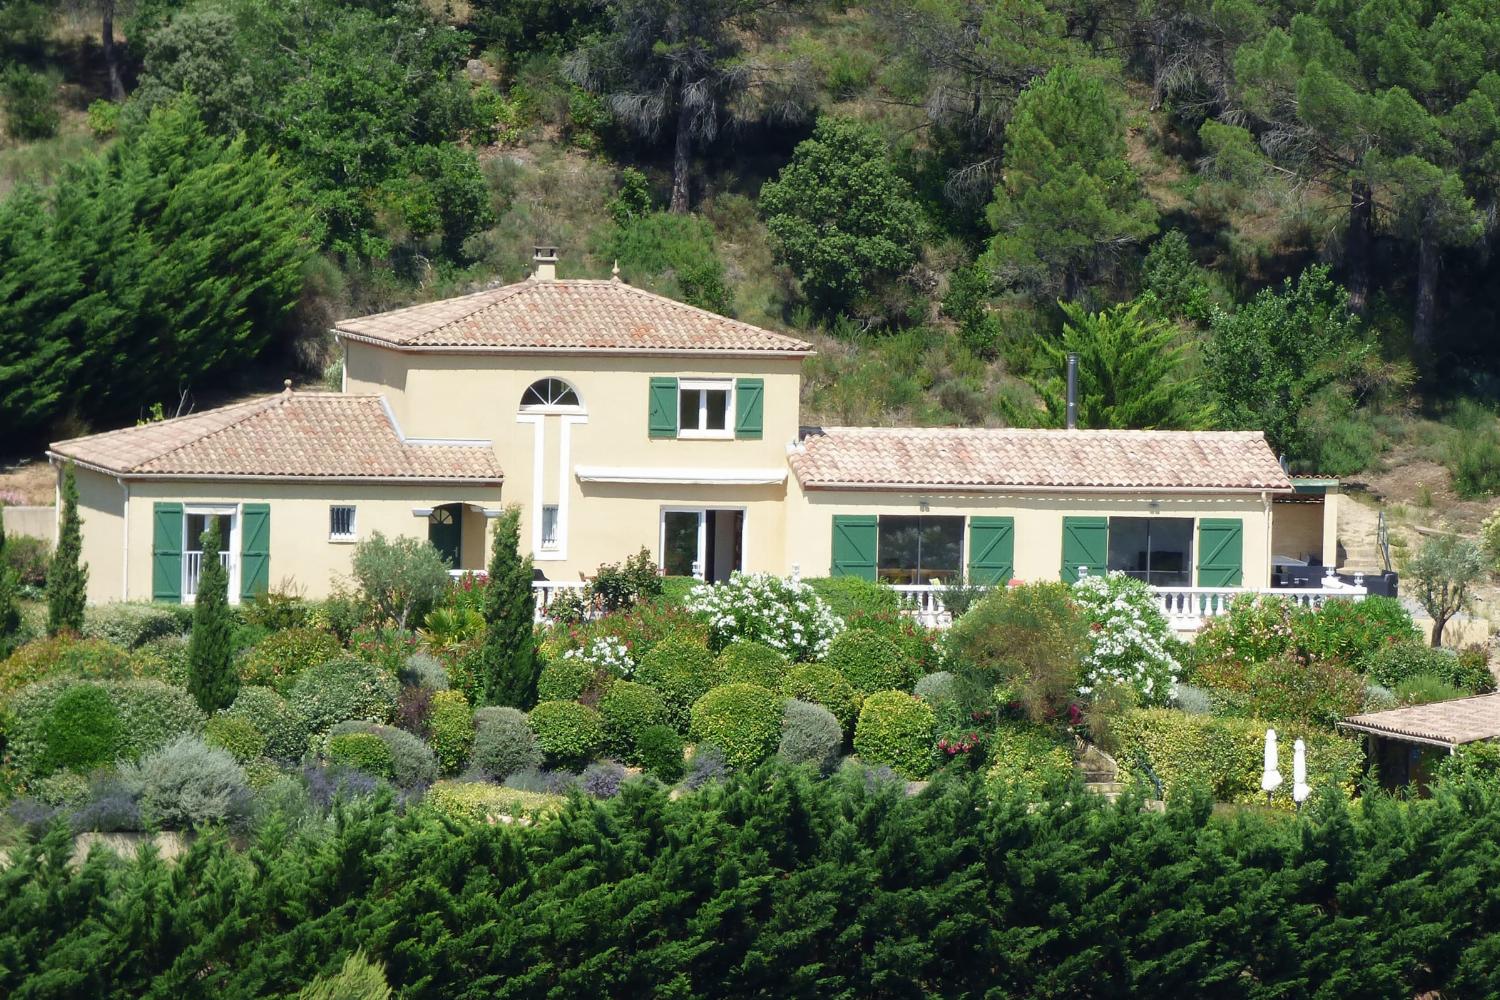 Holiday villa in the South of France